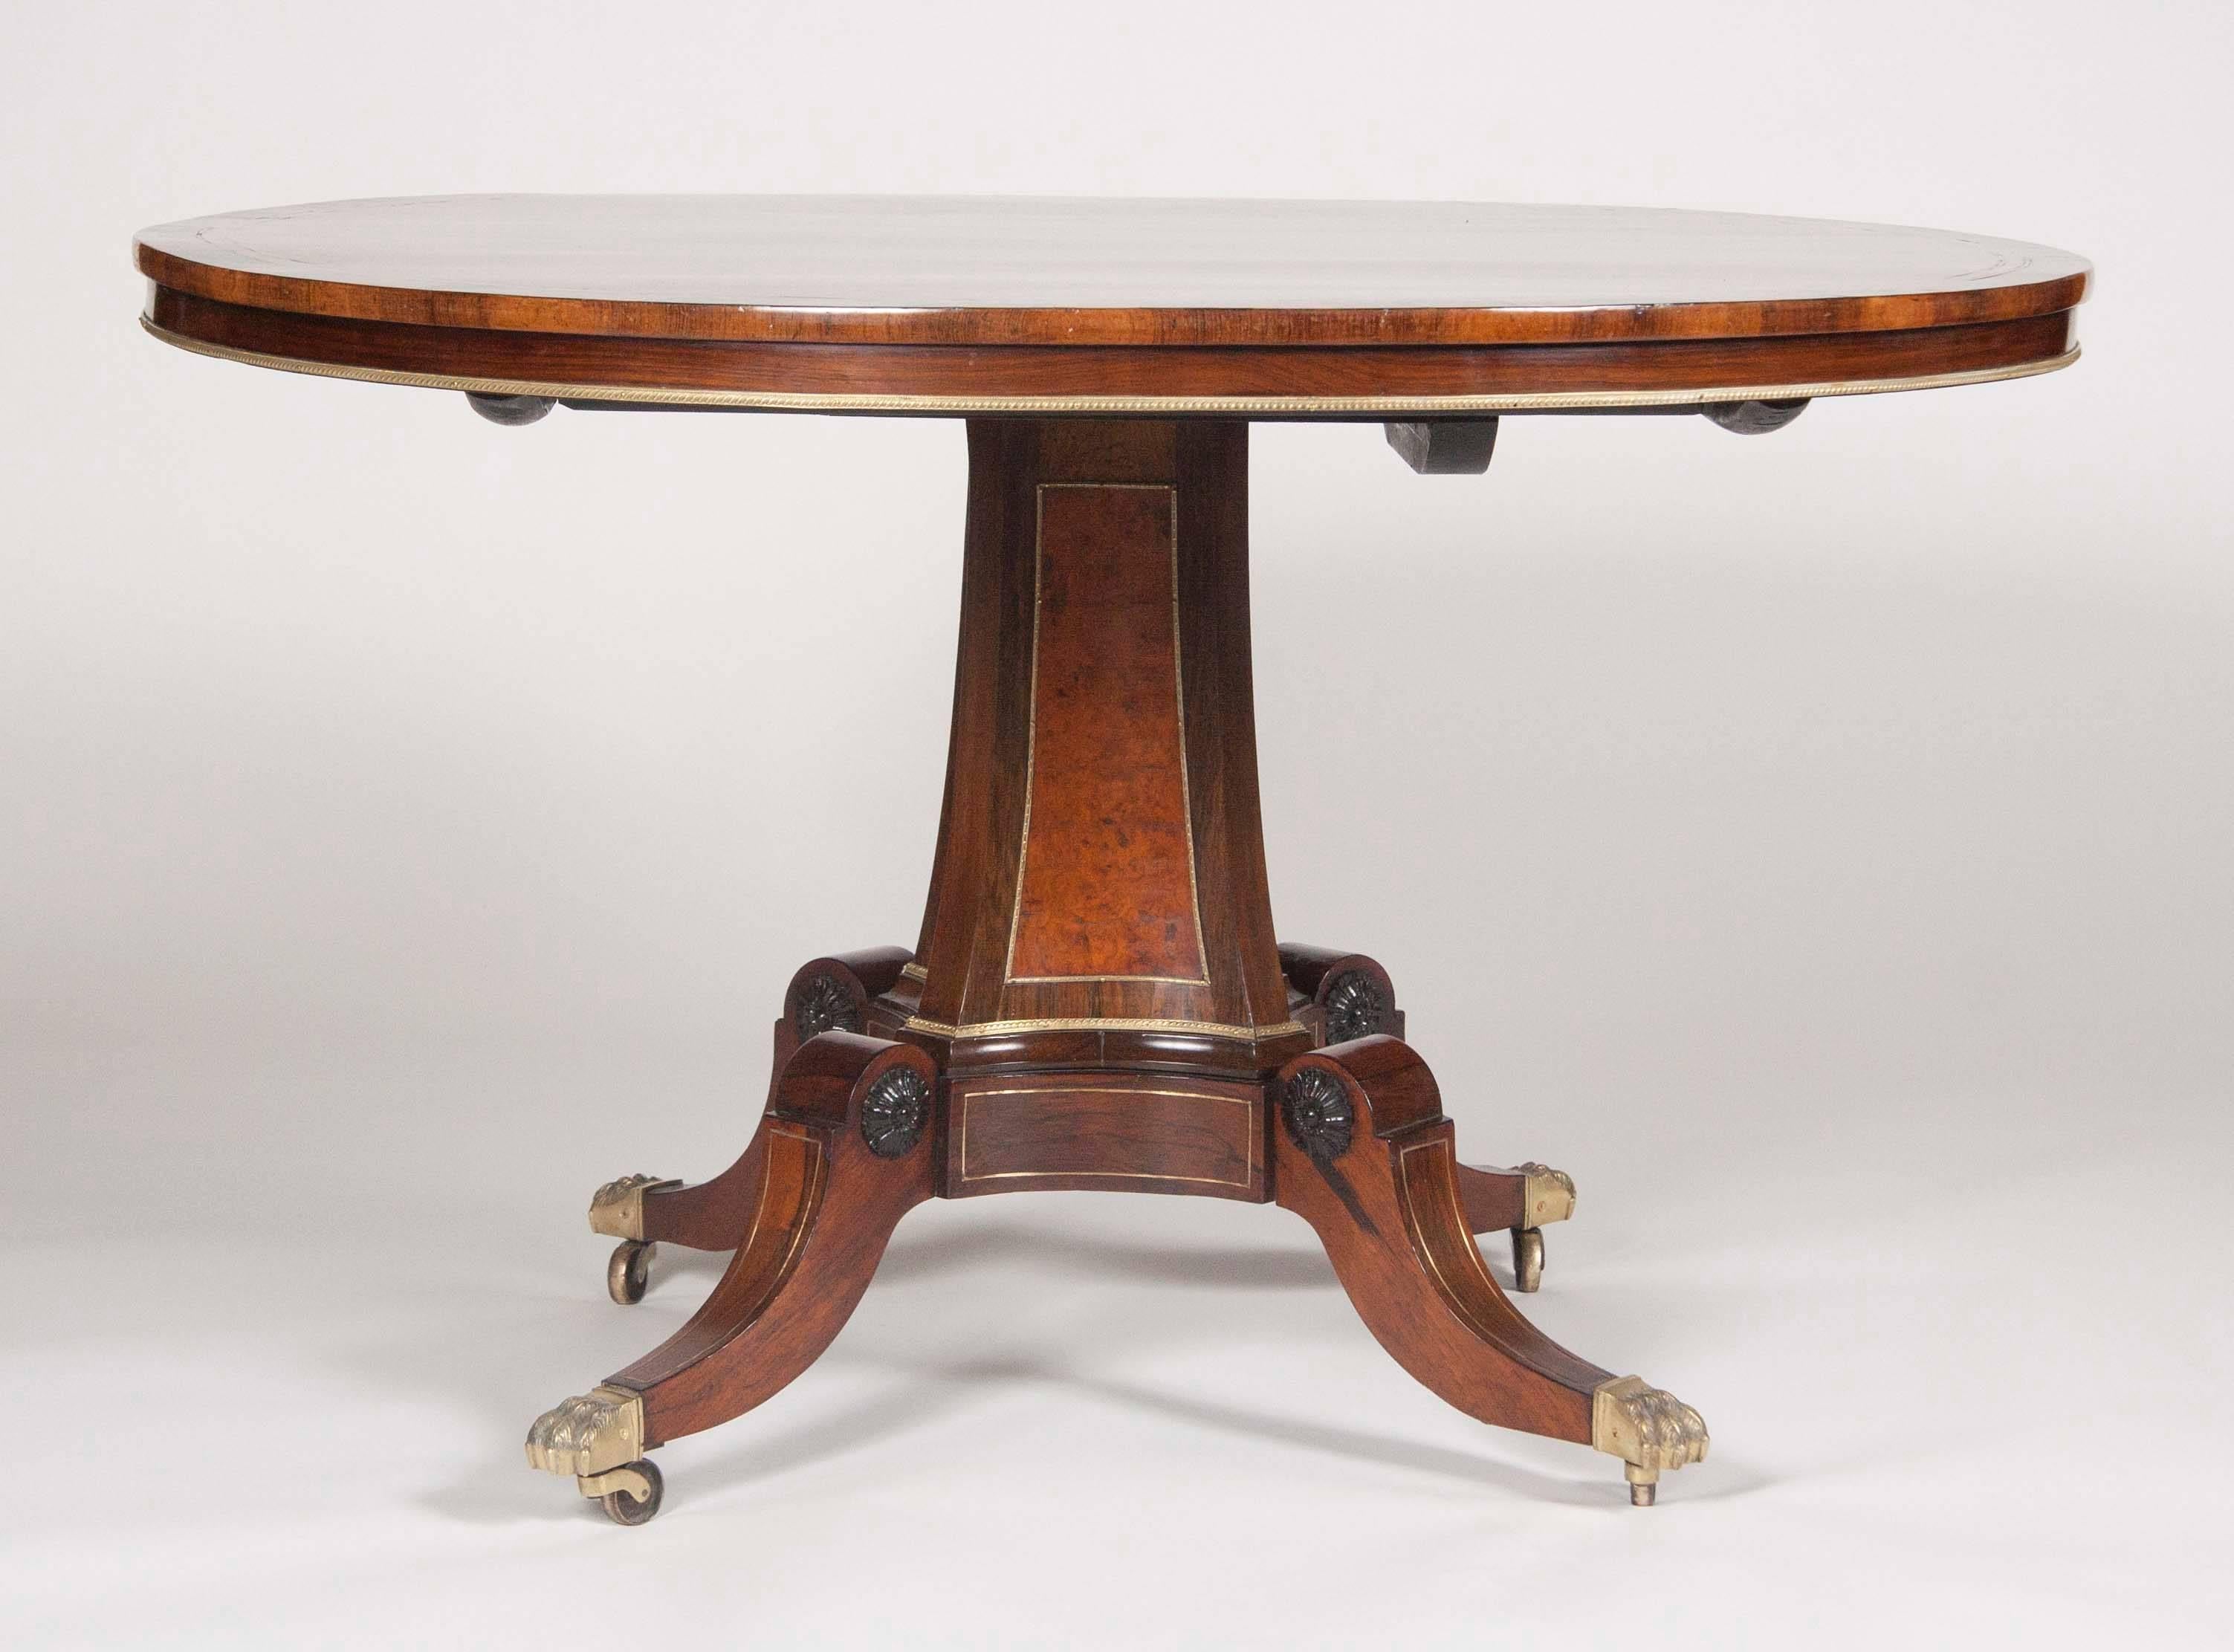 A calamander banded rosewood centre table with gilt bronze mounts and specimen wood elements. The central panel of the concave pillar is burl wood. The swept legs terminate at ebony florets. George Oakley was one of the foremost Regency furniture